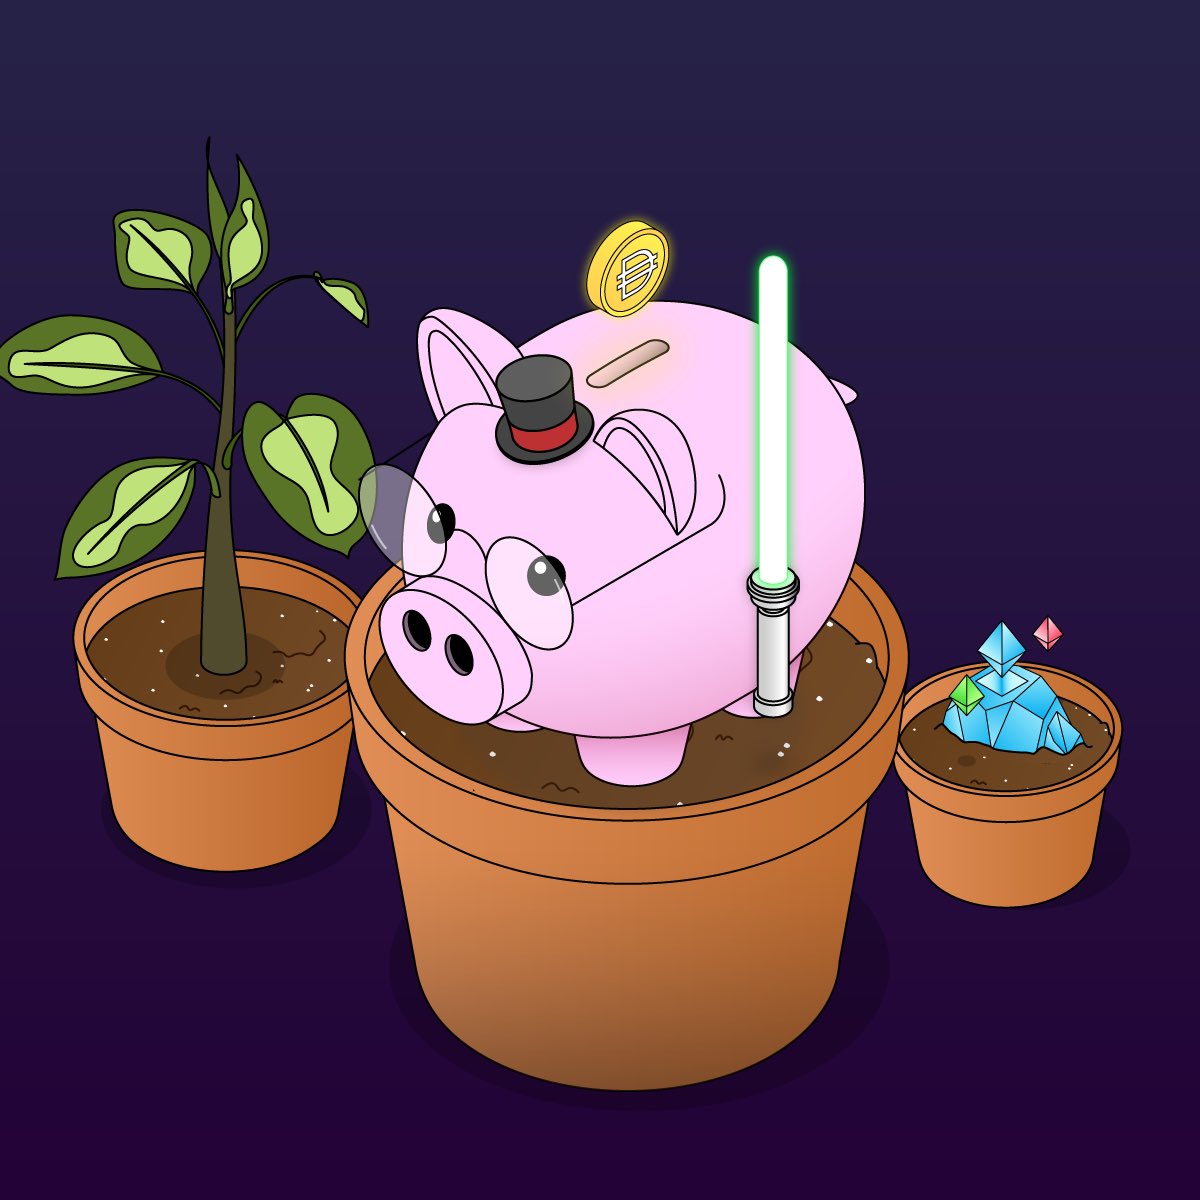 My tokens are less fungible than yours

#nft #nfts #NFTcollectibles #nftcollector #utilitynft #cryptogifting #hodlpigs